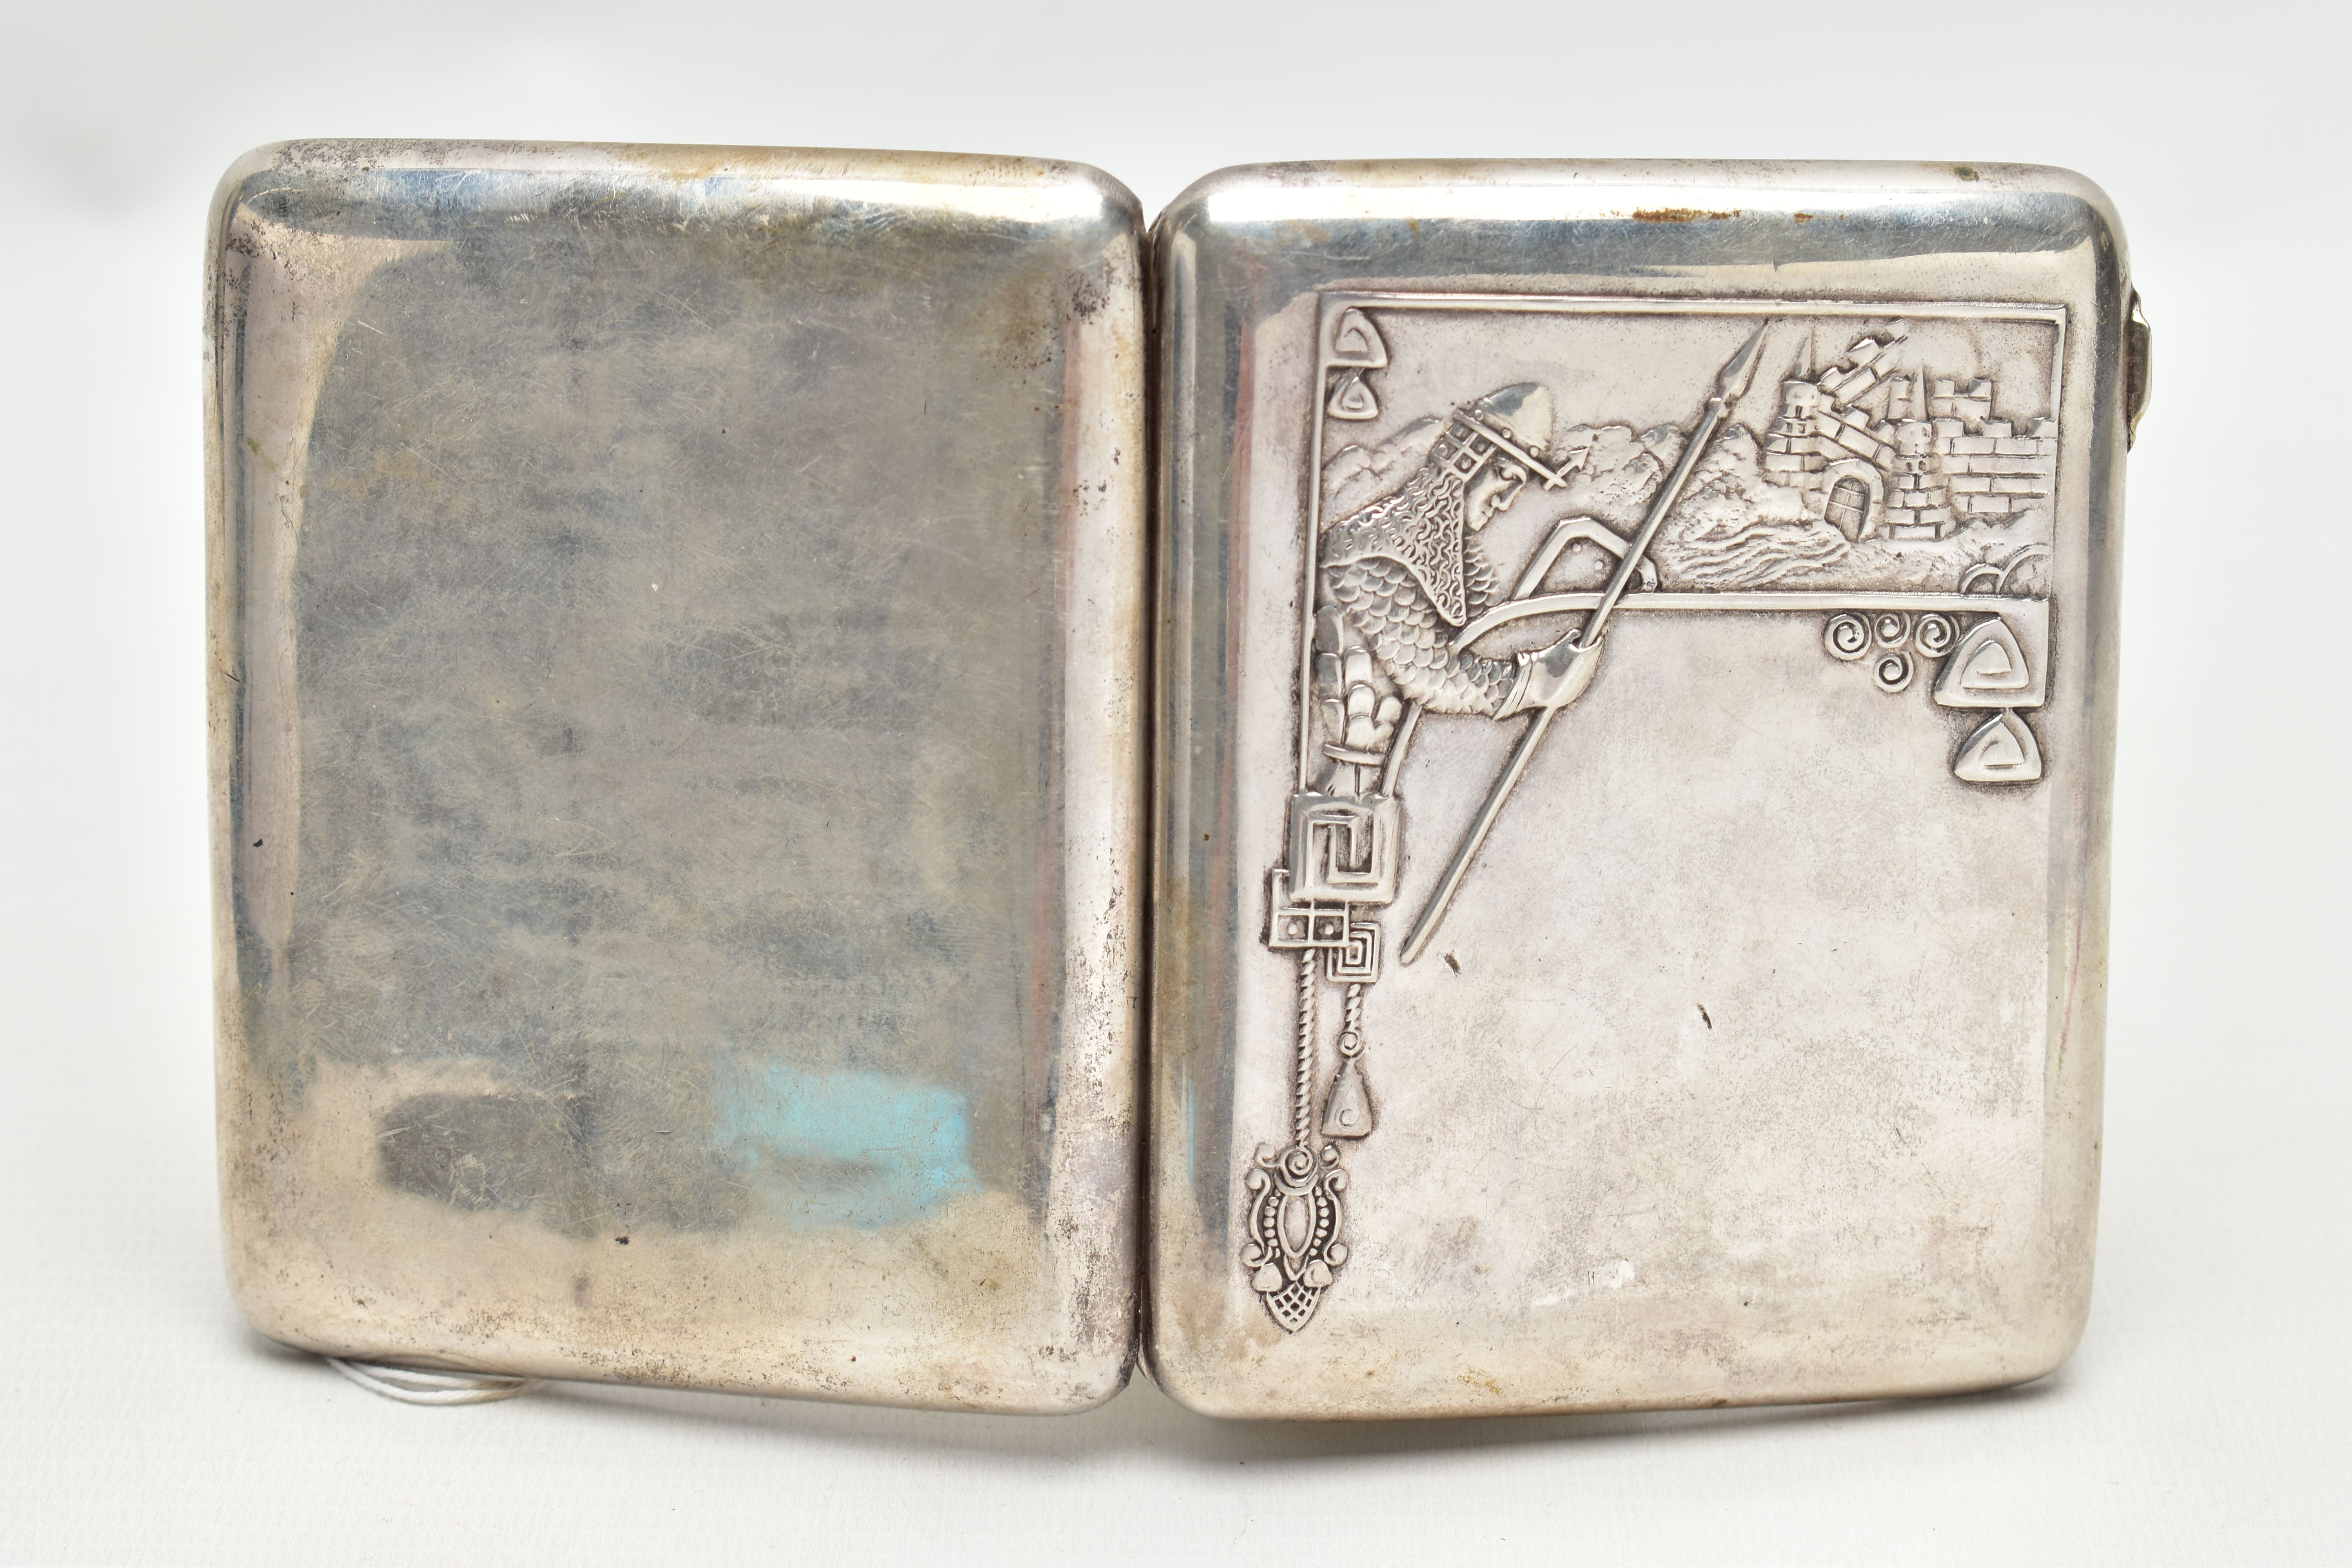 A RUSSIAN SILVER CIGARETTE CASE, of a rounded rectangular form, embossed soldier and castle design